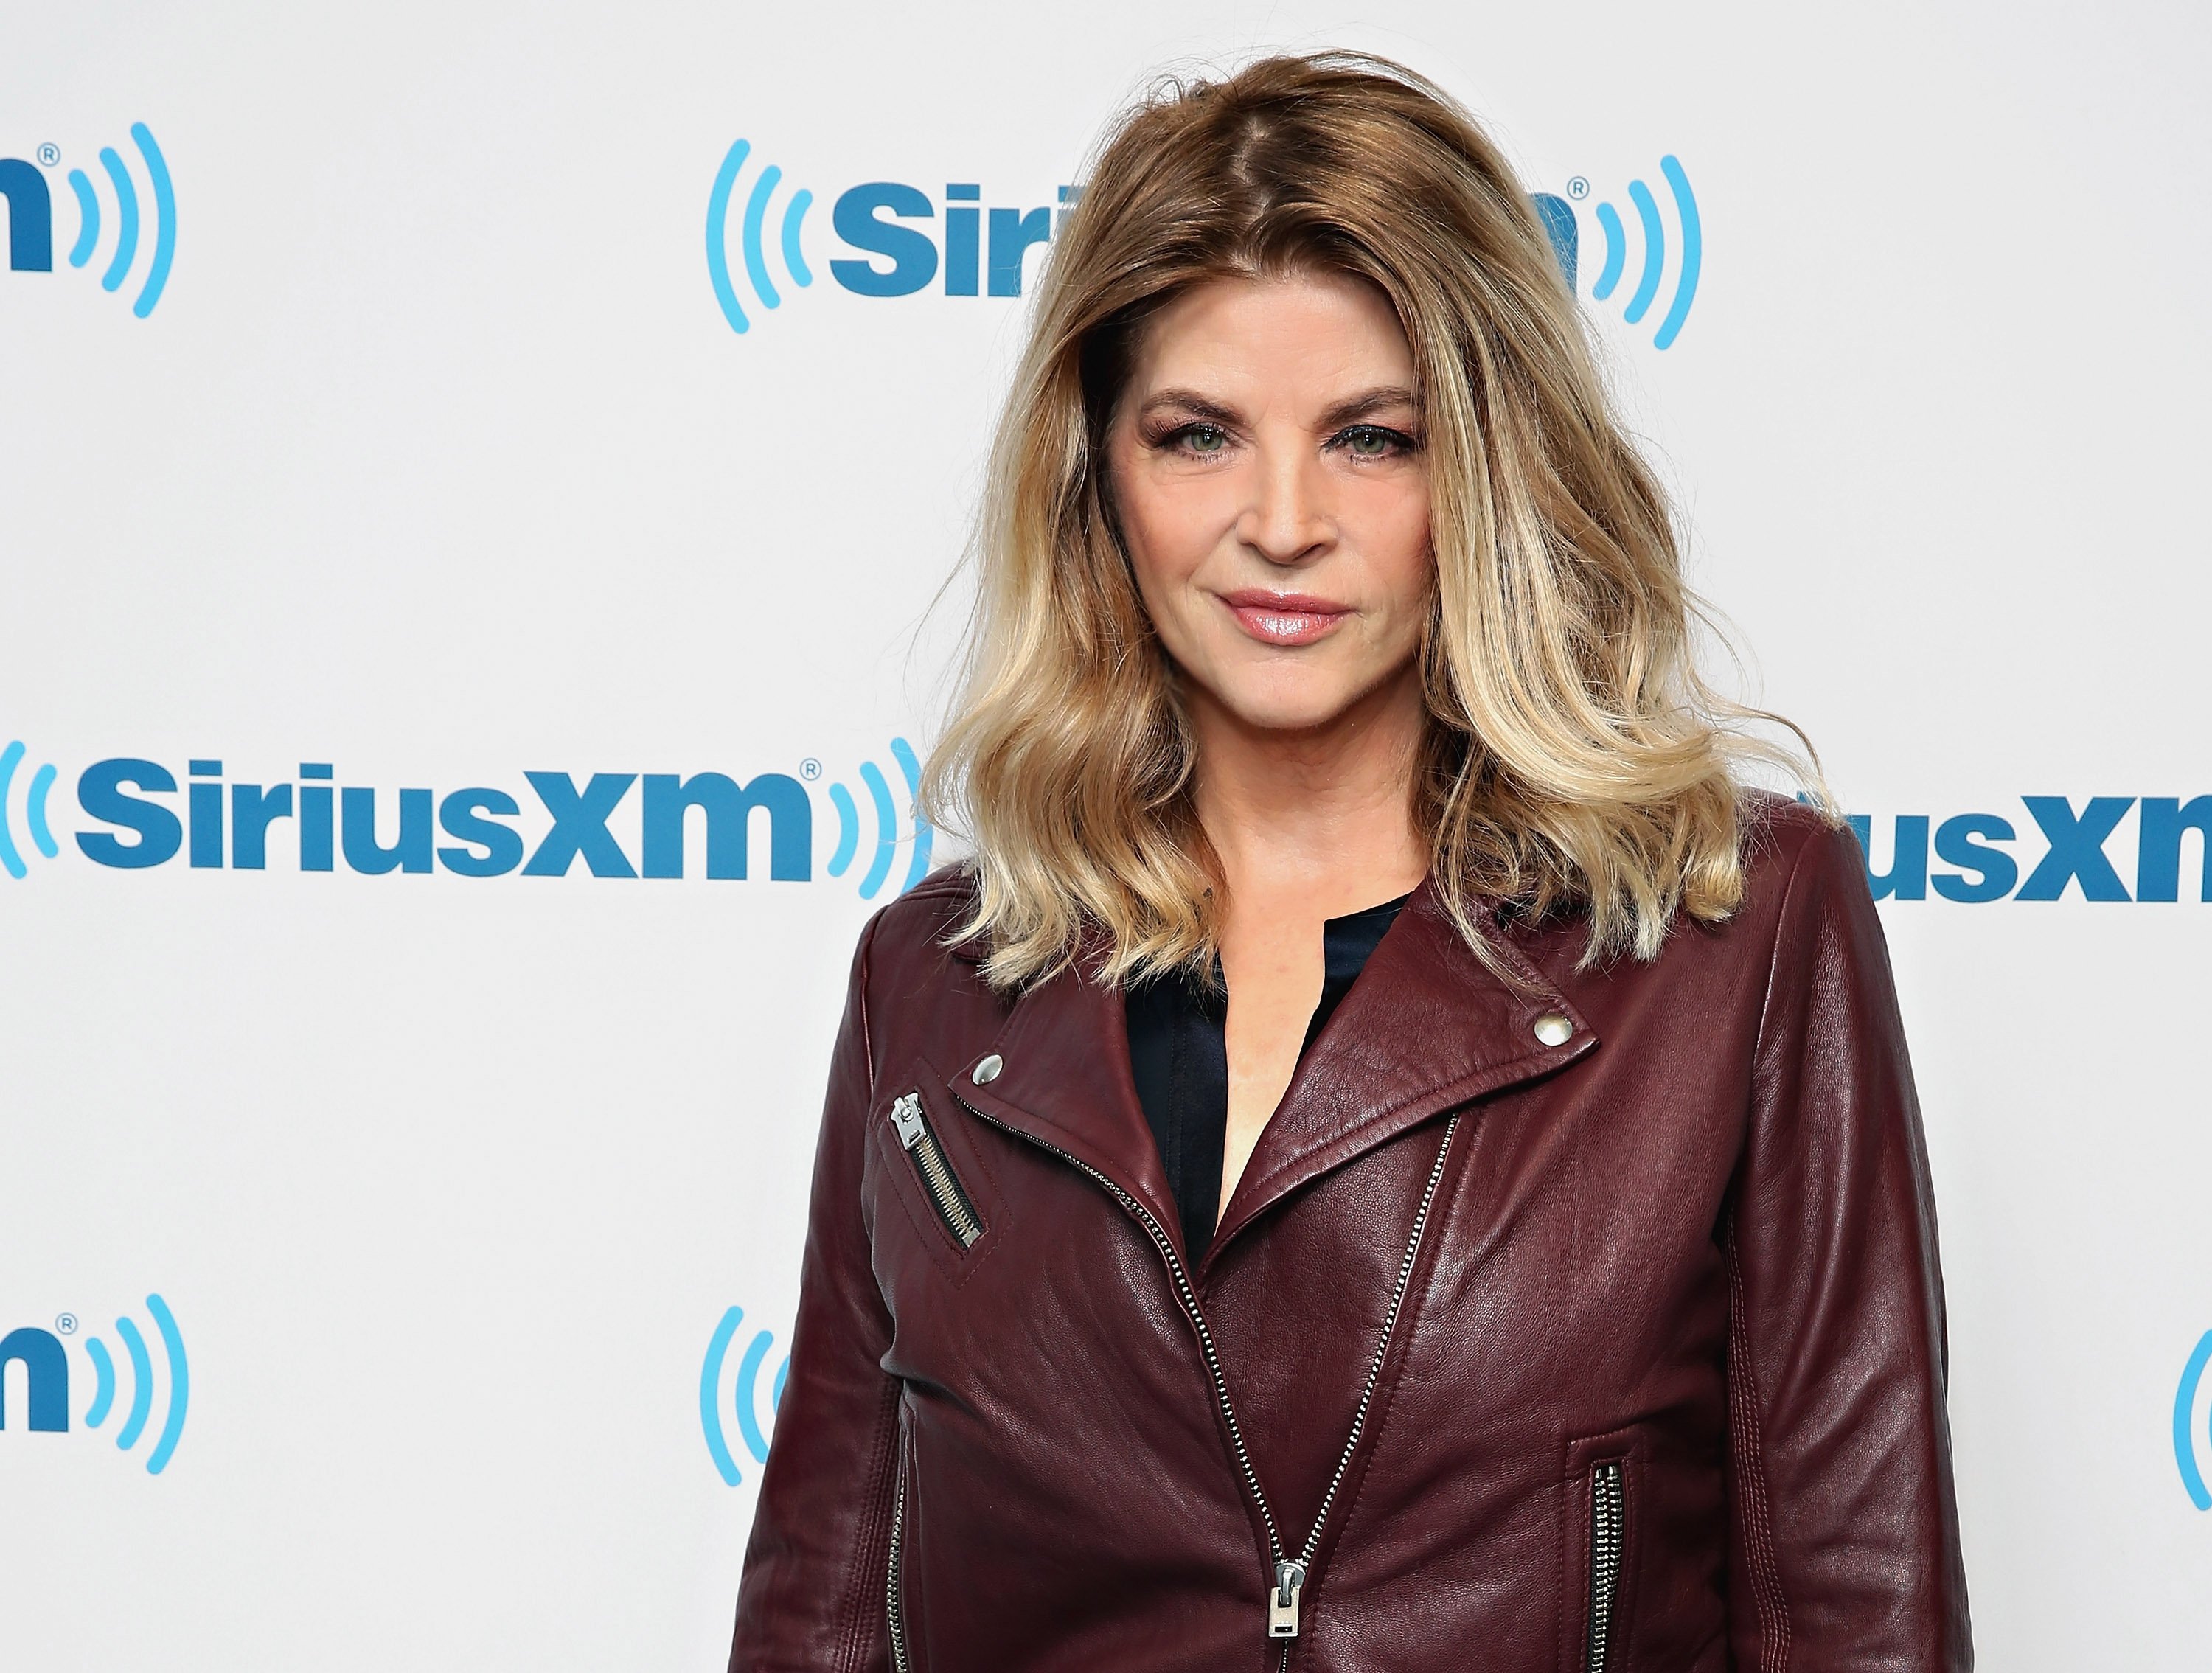 Kirstie Alley visits the SiriusXM Studios on January 6, 2016 in New York City.